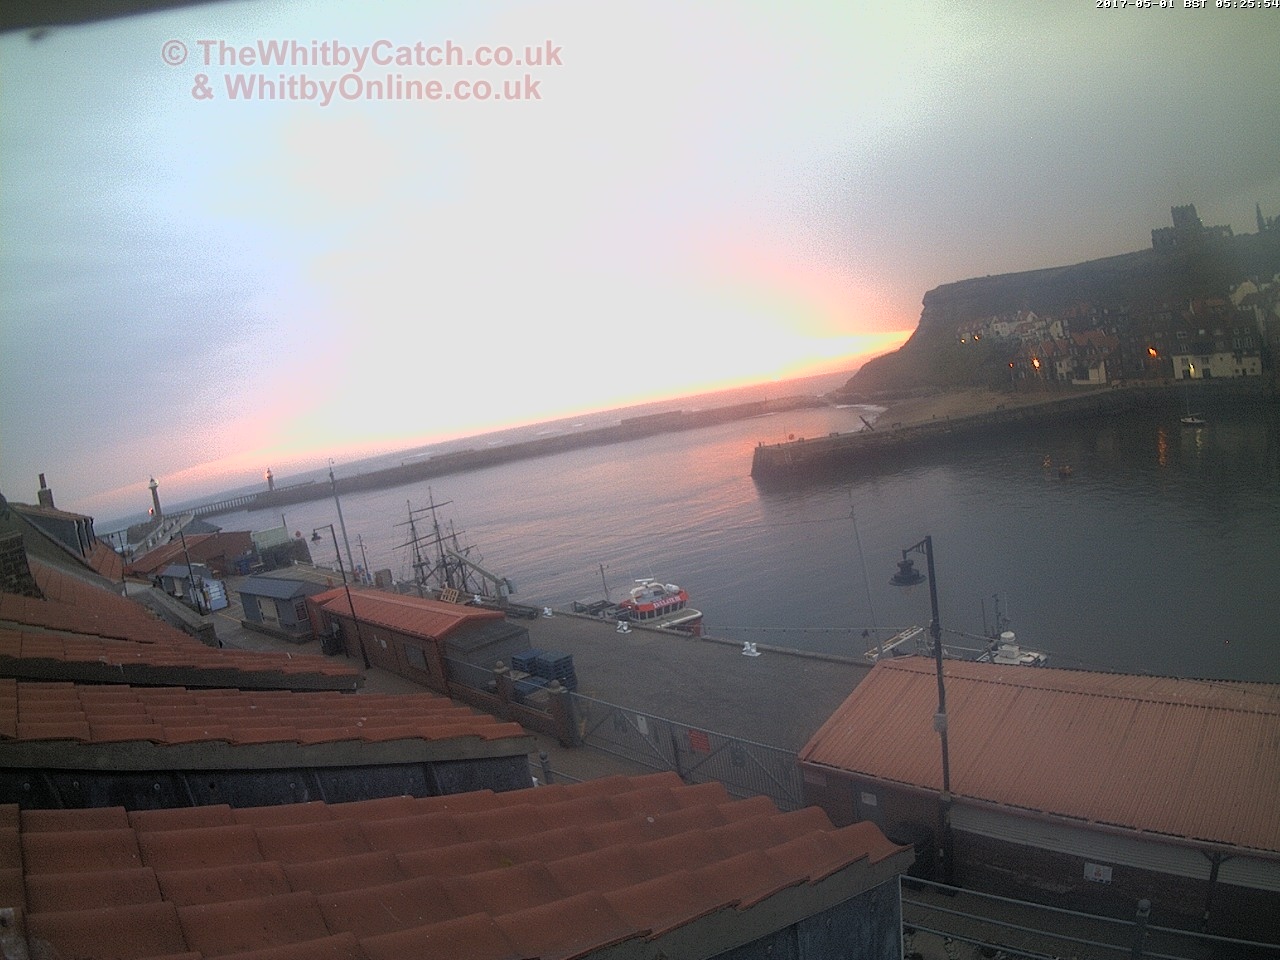 Whitby Mon 1st May 2017 05:26.